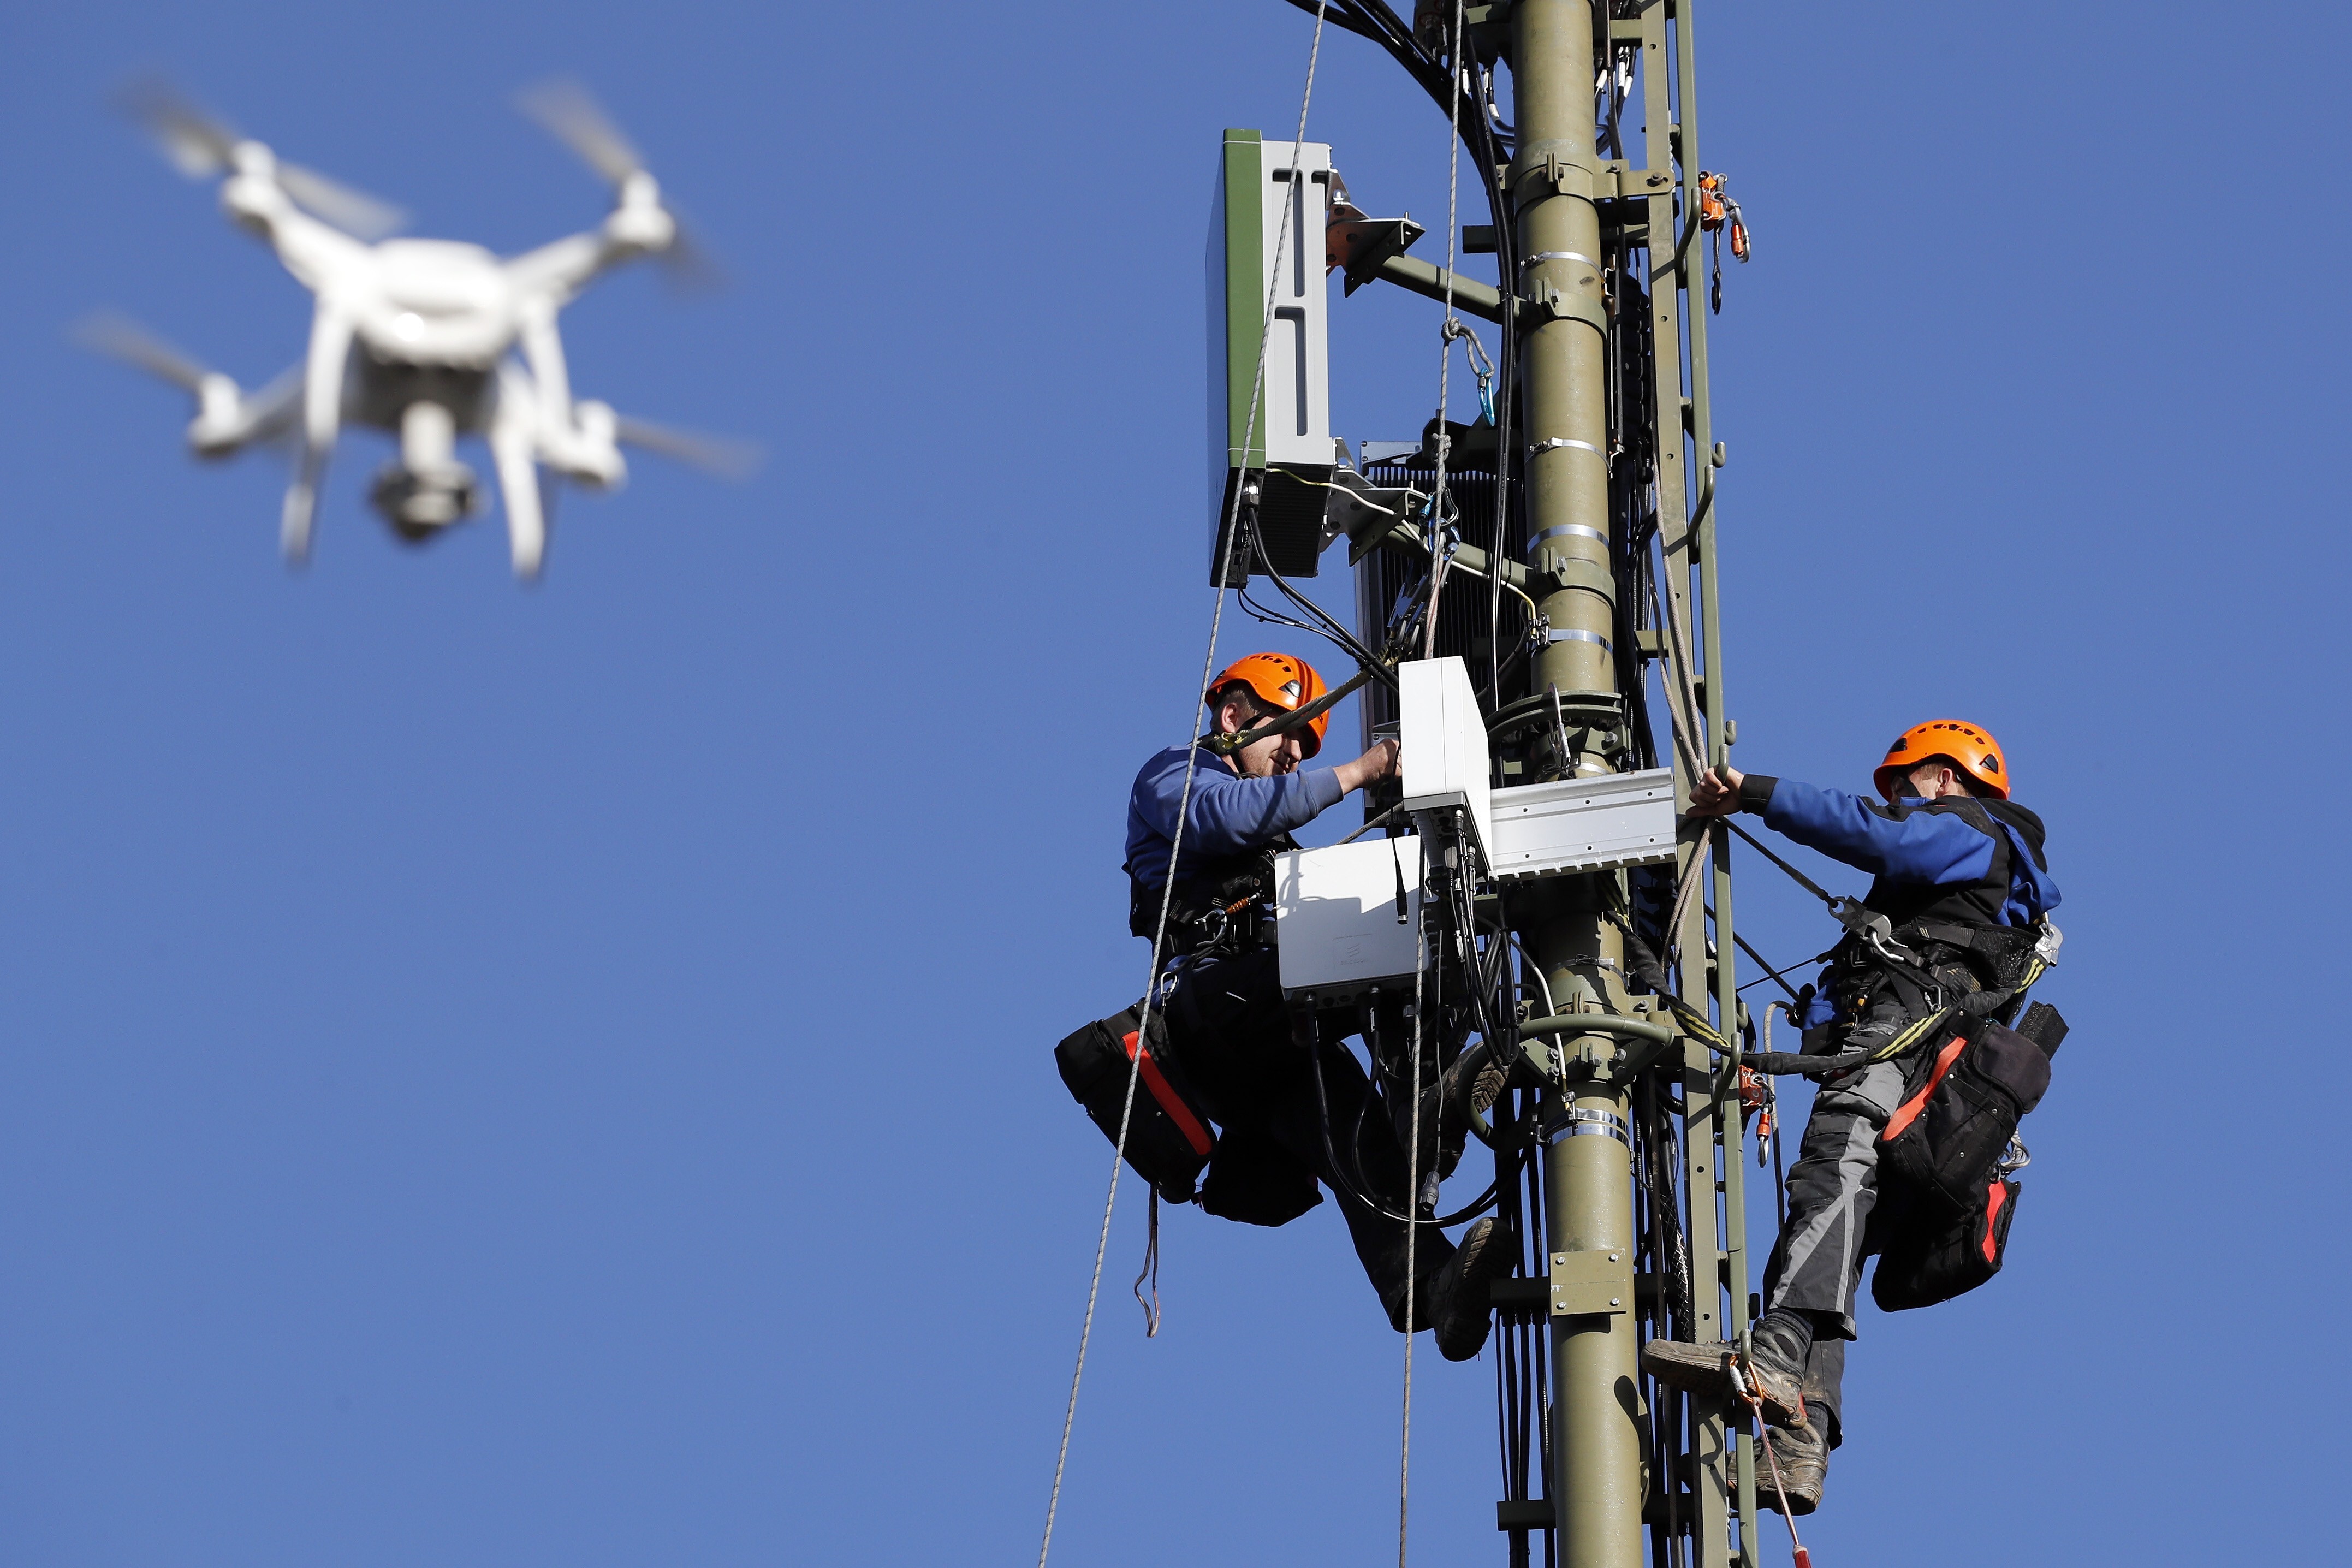 A drone flies alongside engineers as they equip a Swisscom network mast with Ericsson’s 5G base stations in Hindelbank, Switzerland, on December 18, 2019. Photo: Bloomberg